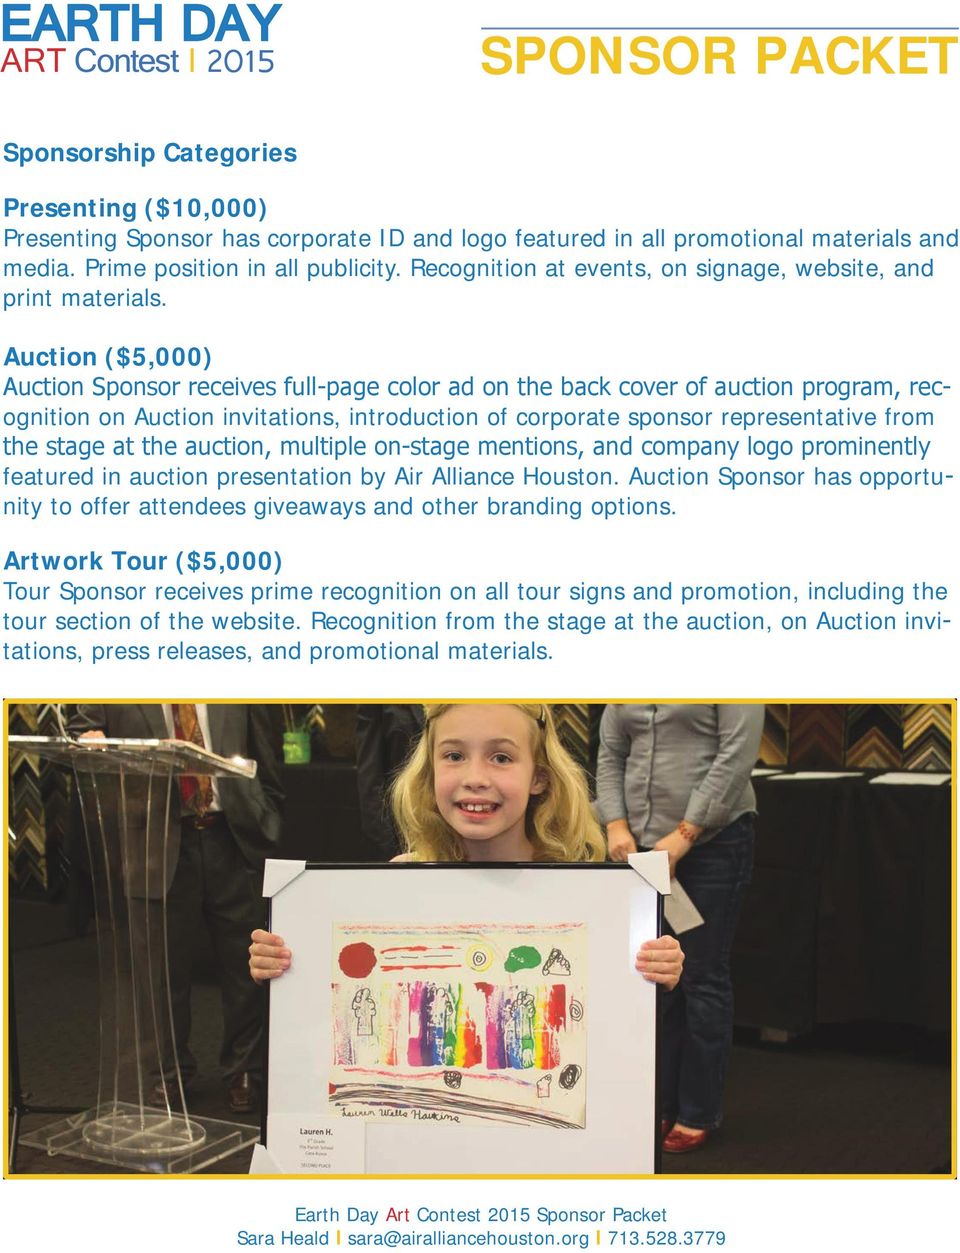 Auction ($5,000) Auction Sponsor receives full-page color ad on the back cover of auction program, recognition on Auction invitations, introduction of corporate sponsor representative from the stage